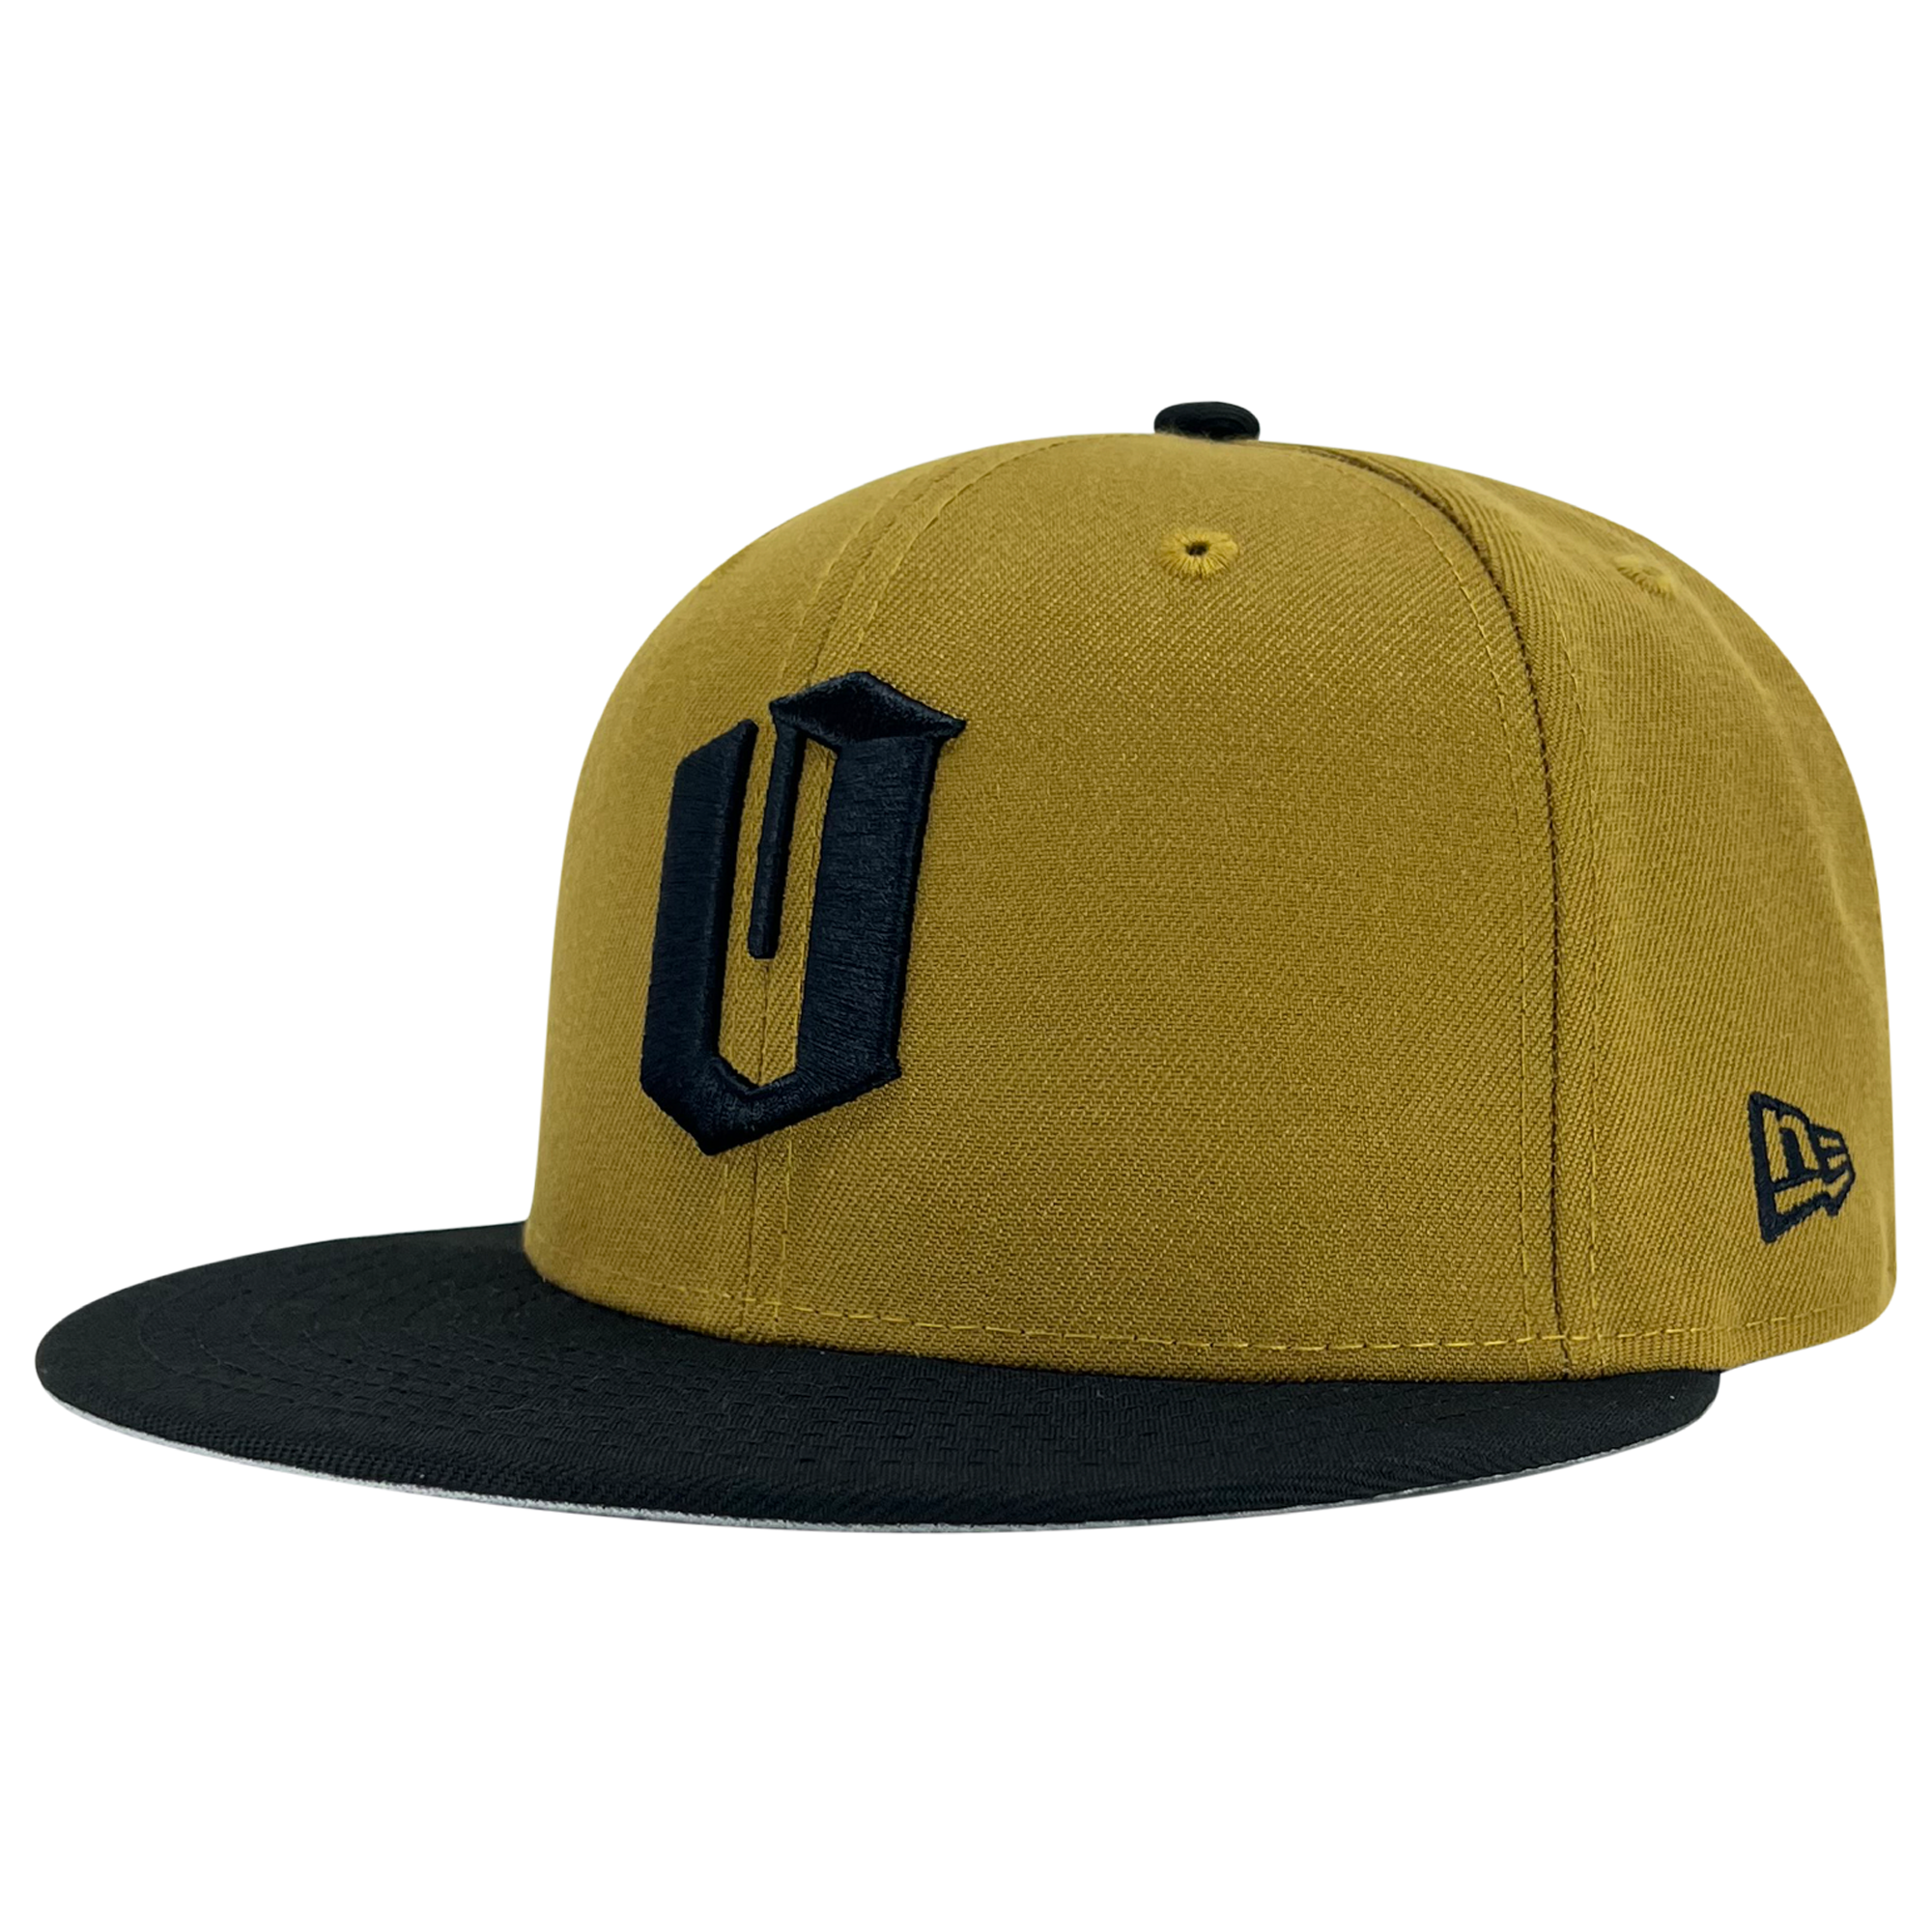 New Era 59FIFTY gold fitted cap with black embroidered O for Oakland & black bill. It is angled to show the New Era logo on the left wear side.